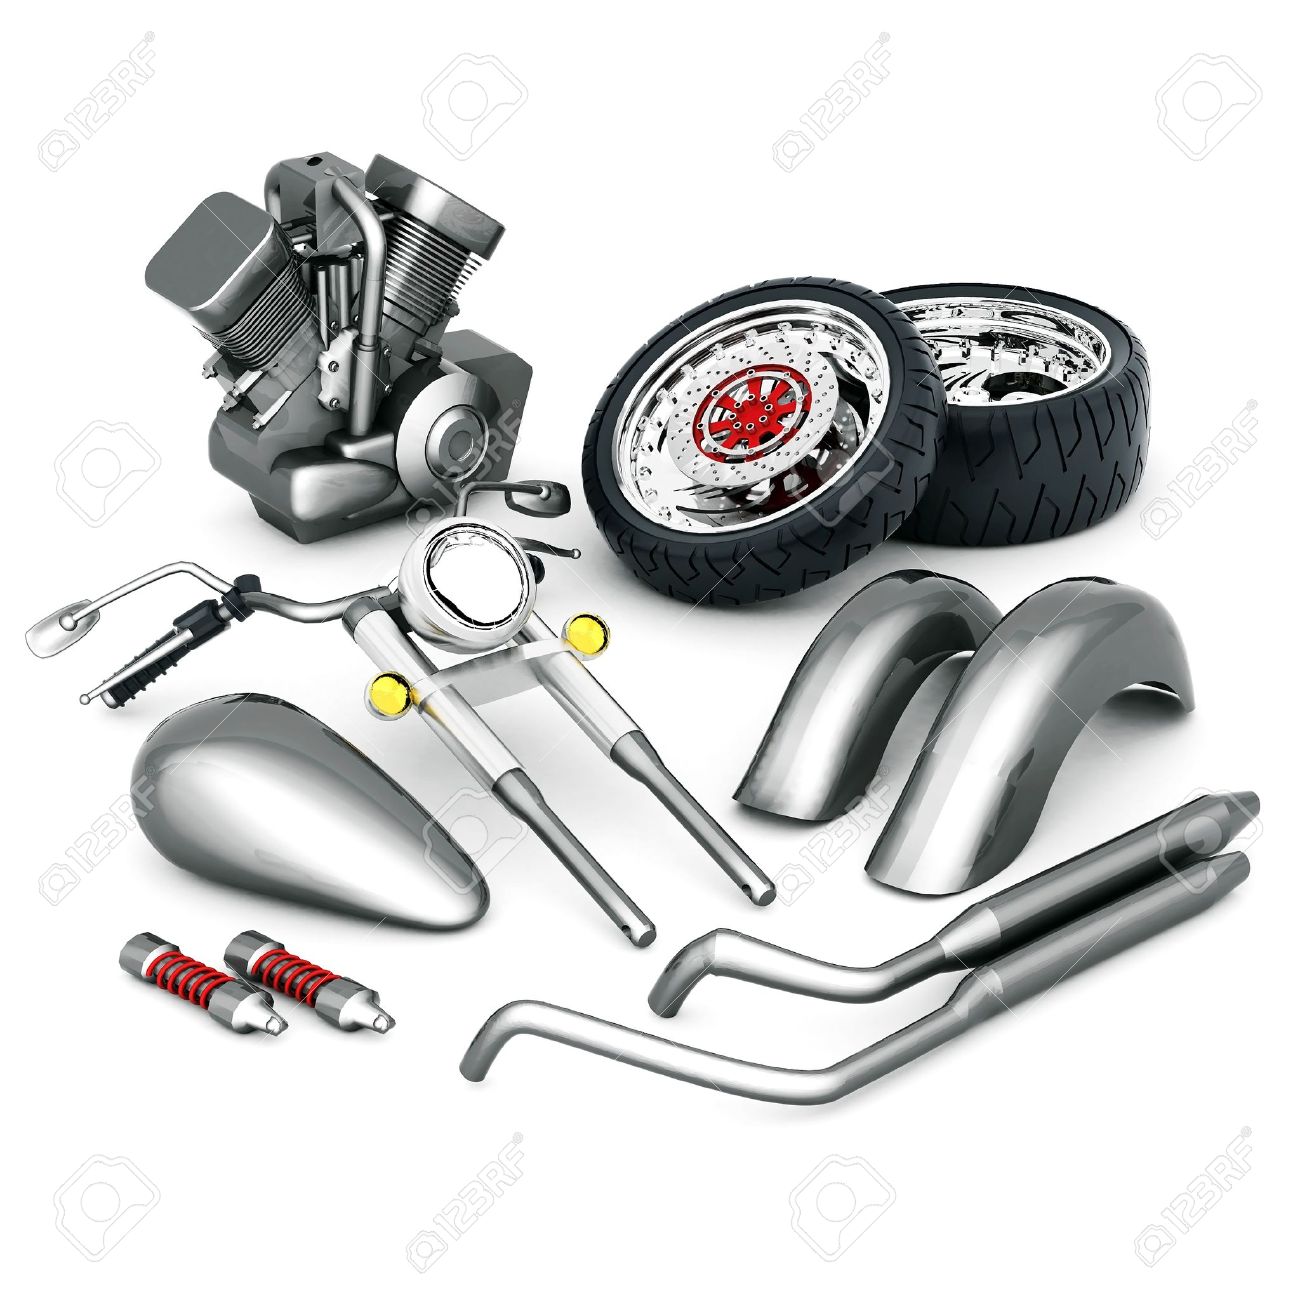 Online Motor Cycle Parts